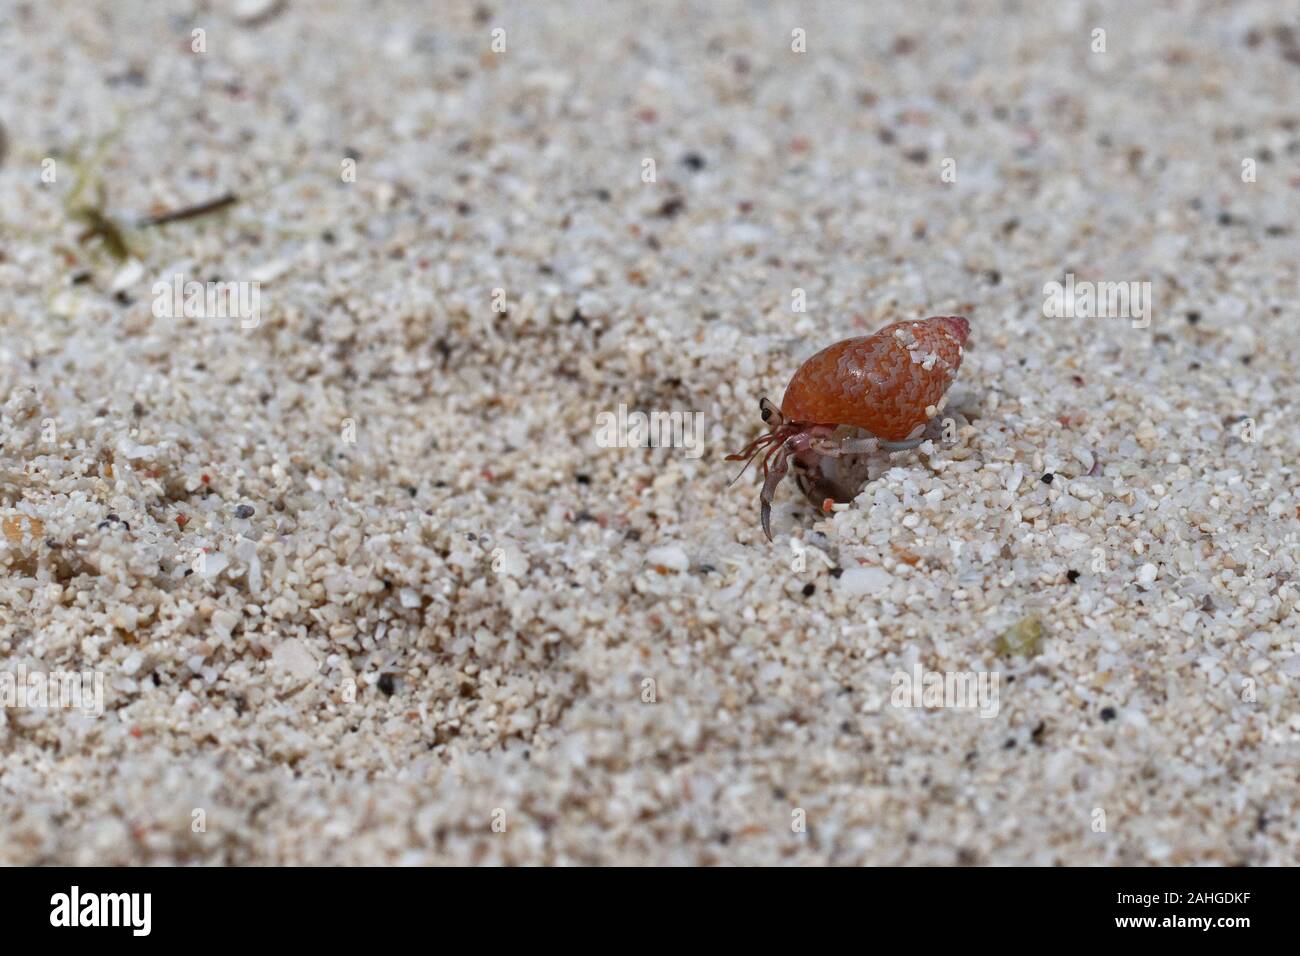 Wanderlust of the hermit crab in the stolen red shell Stock Photo